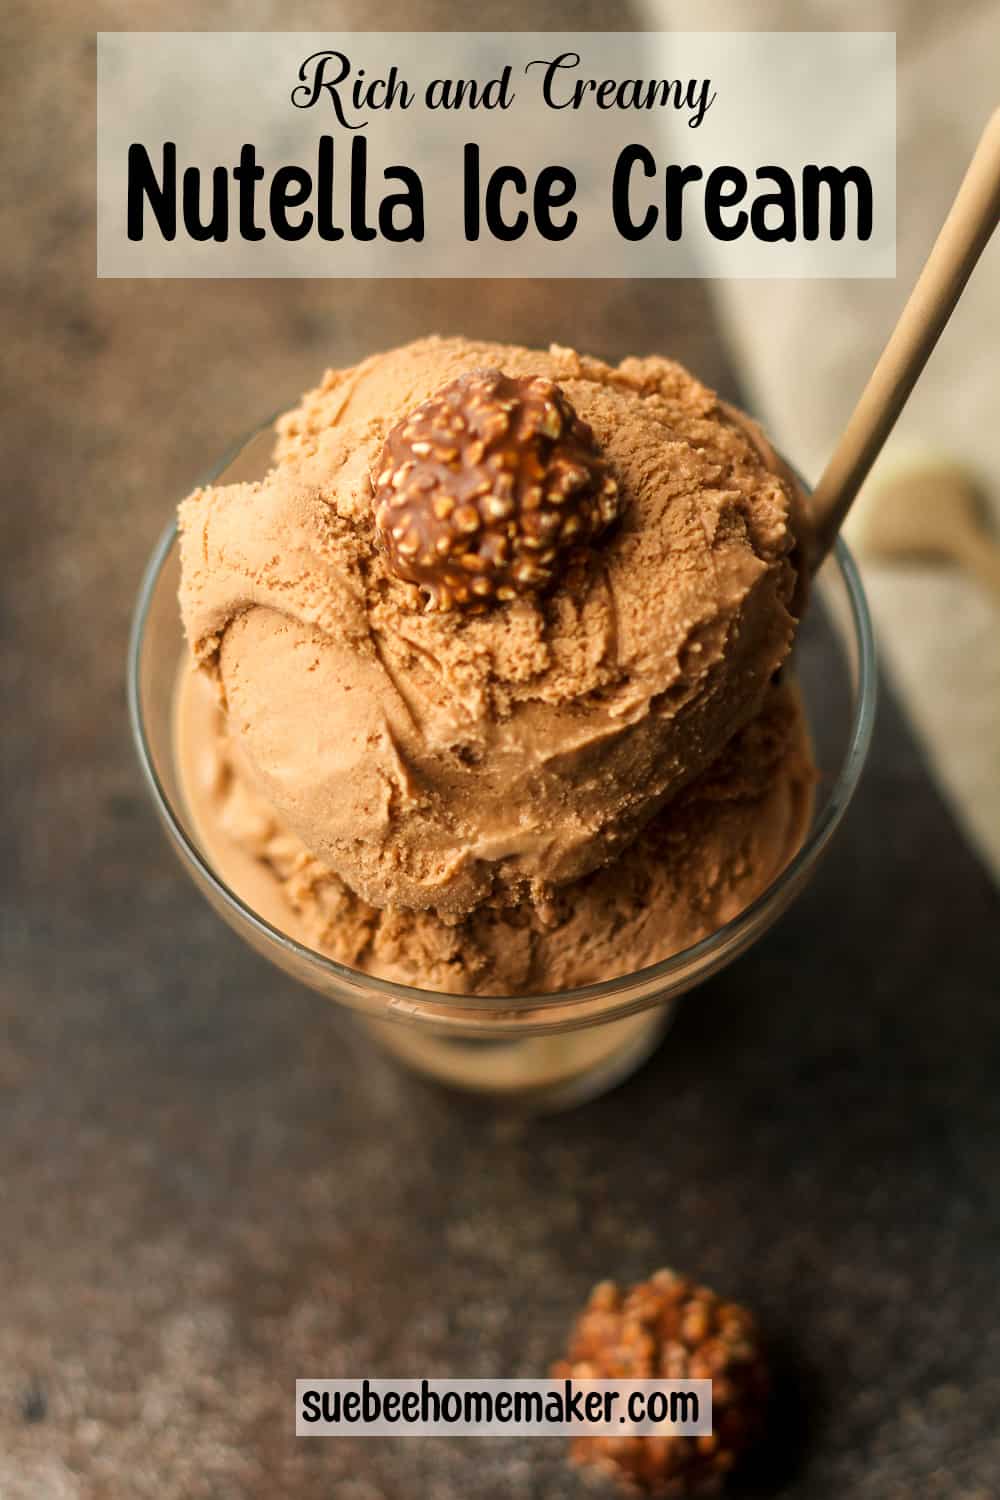 A bowl of nutella ice cream with a hazelnut on top.